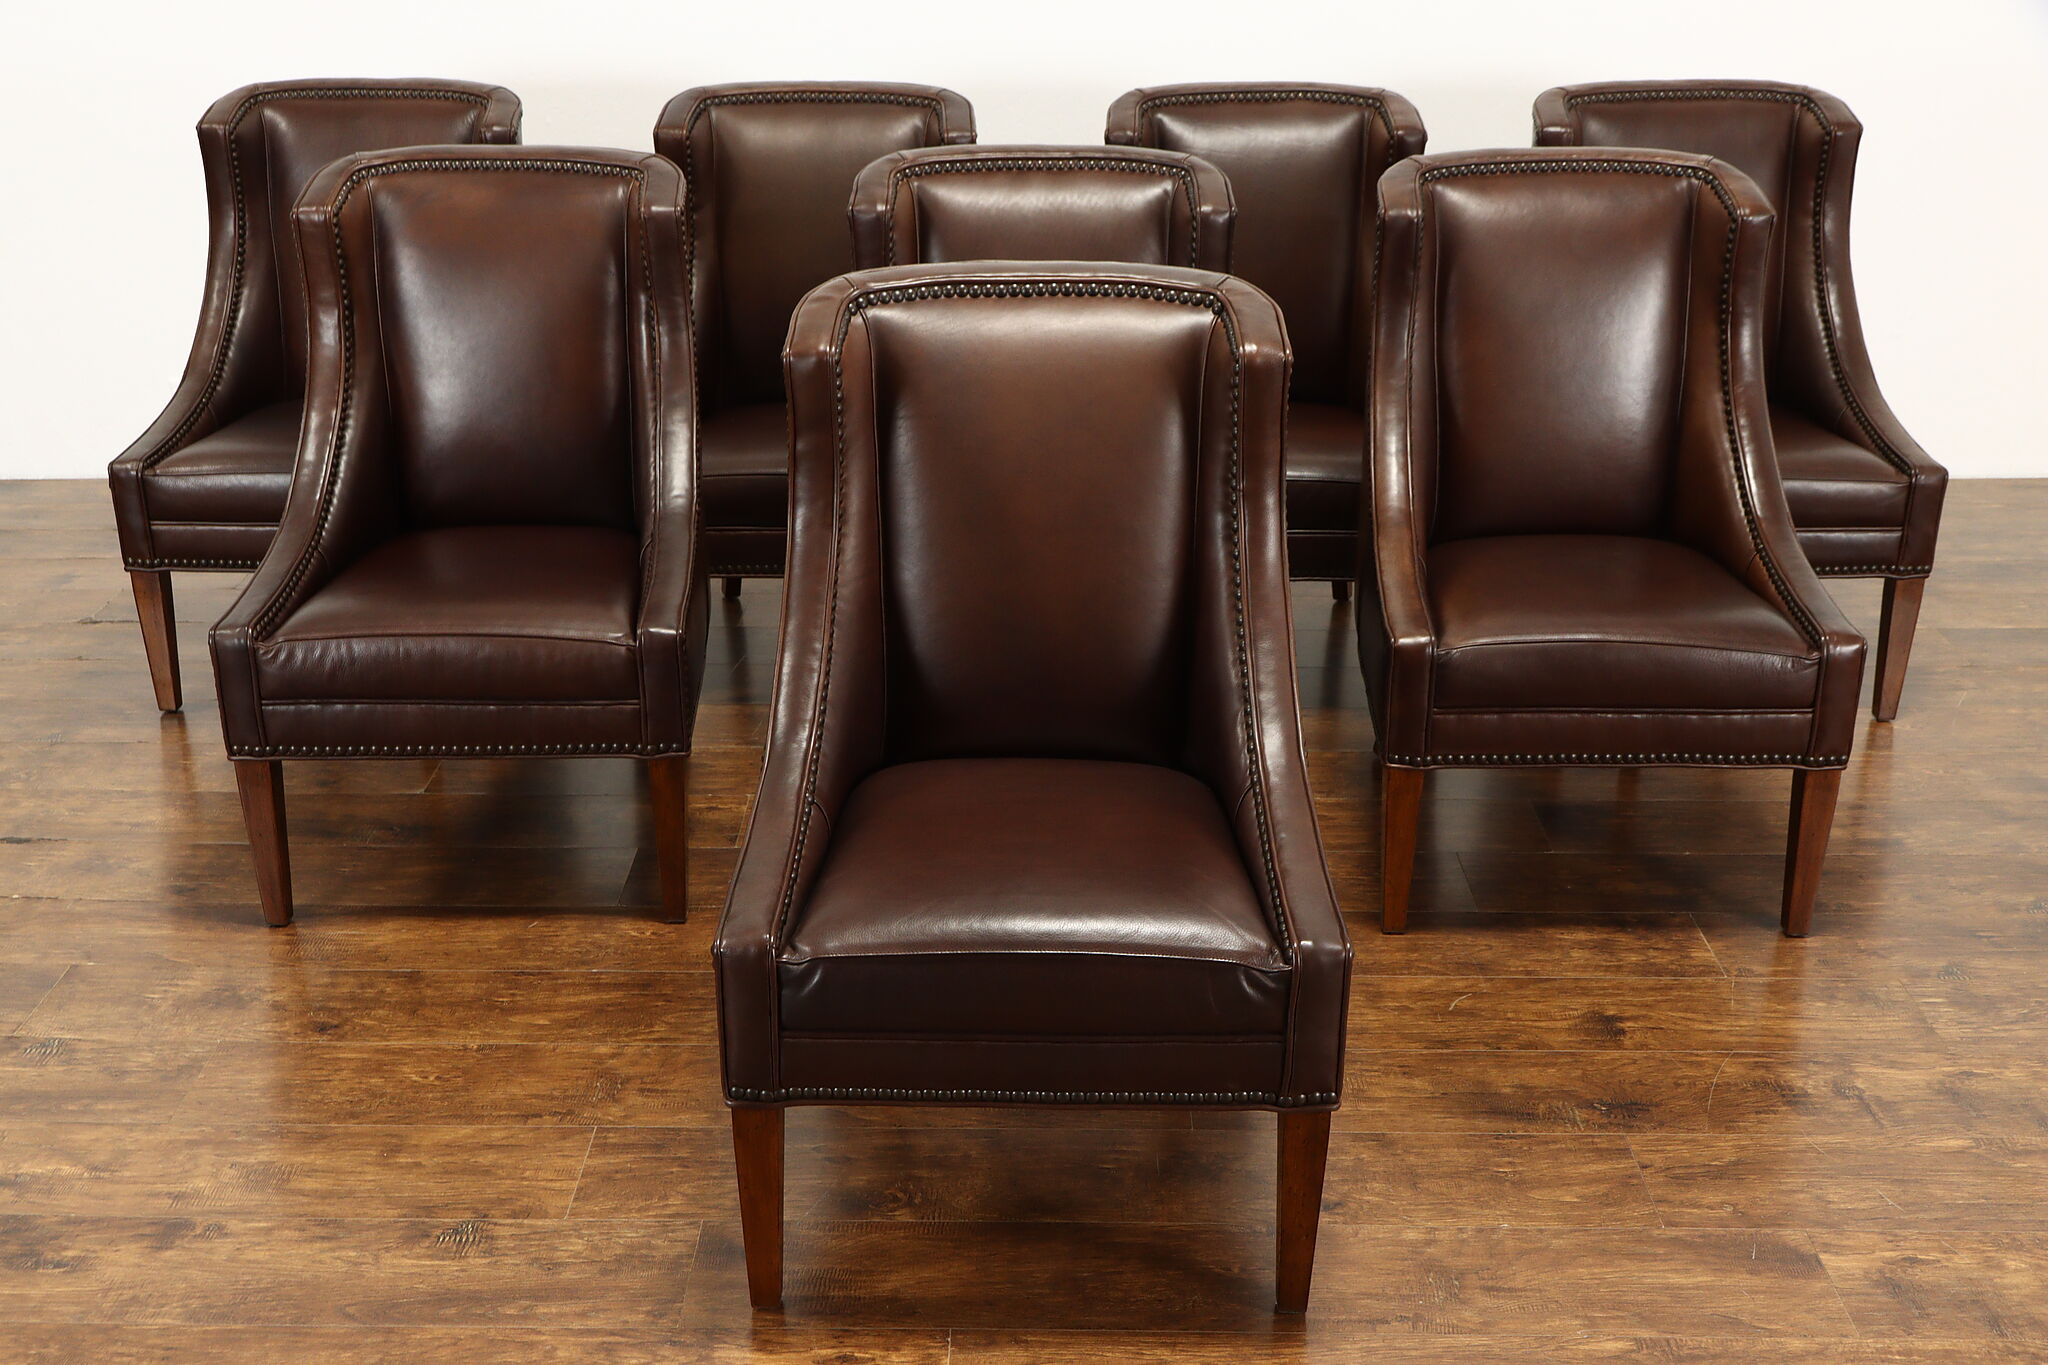 Burgundy Red Nailhead Leather Dining Room Chairs